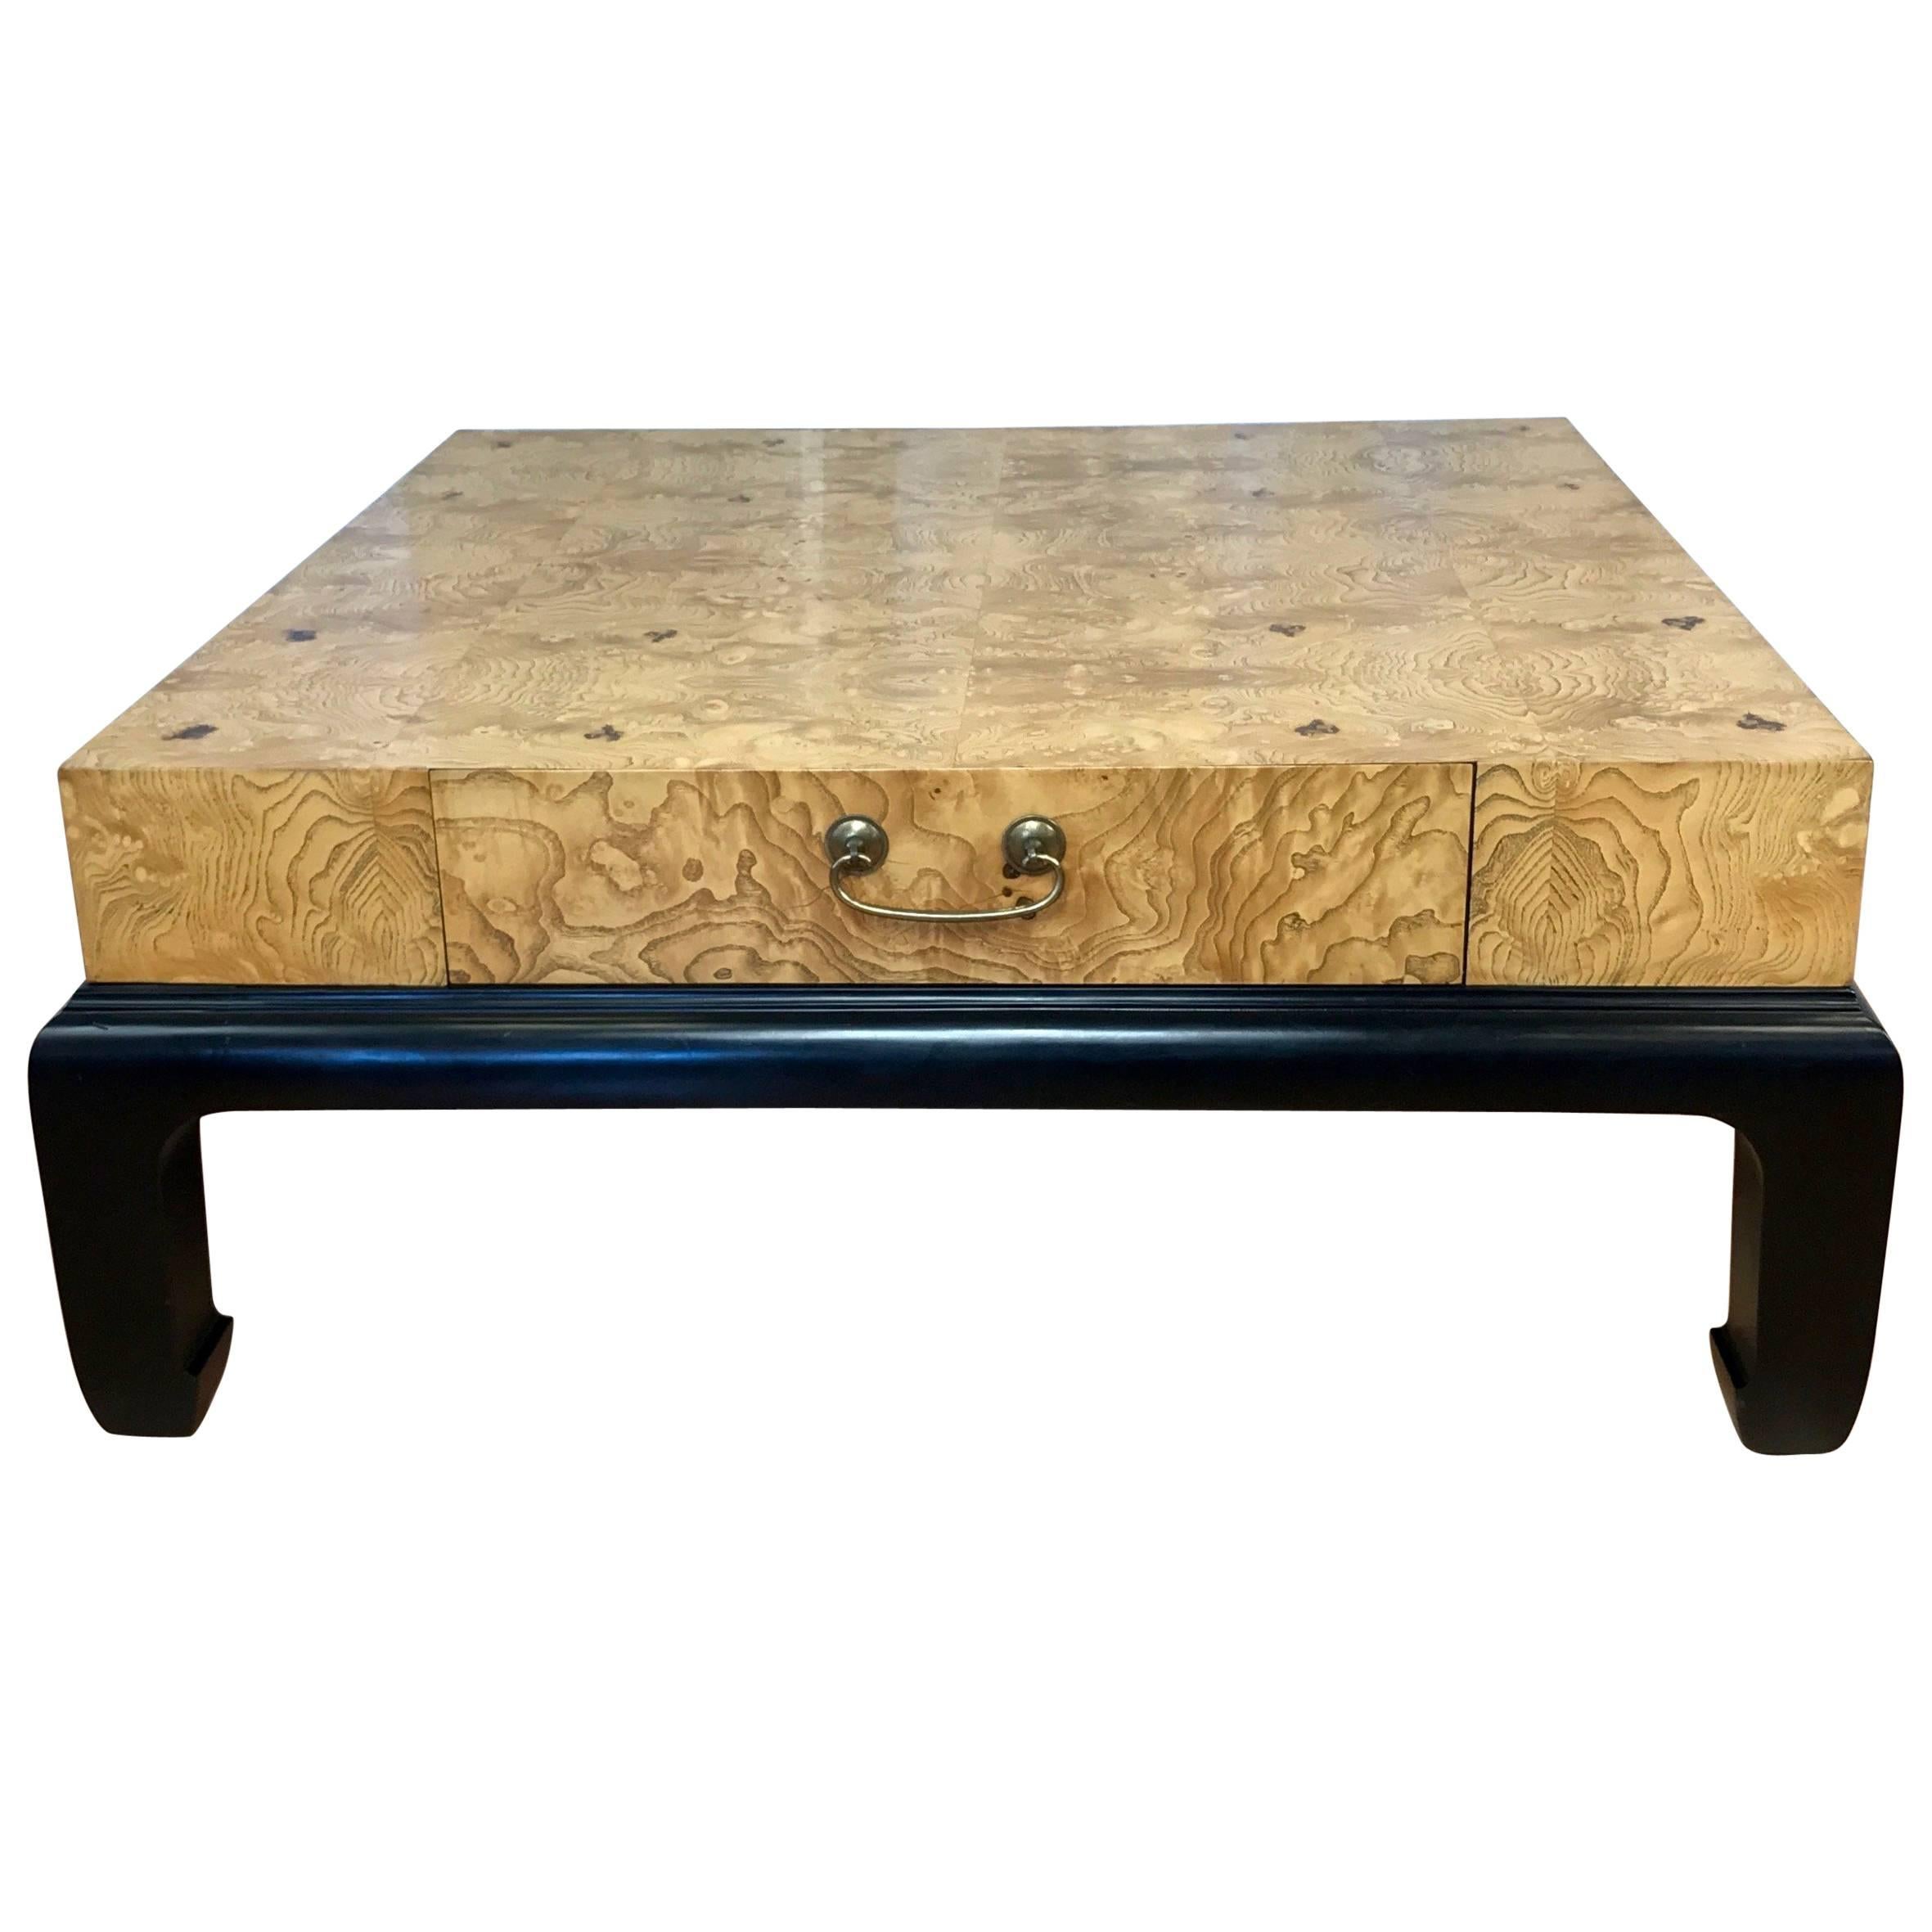 Large Burl Wood Coffee Table with Drawers Attributed to Henredon